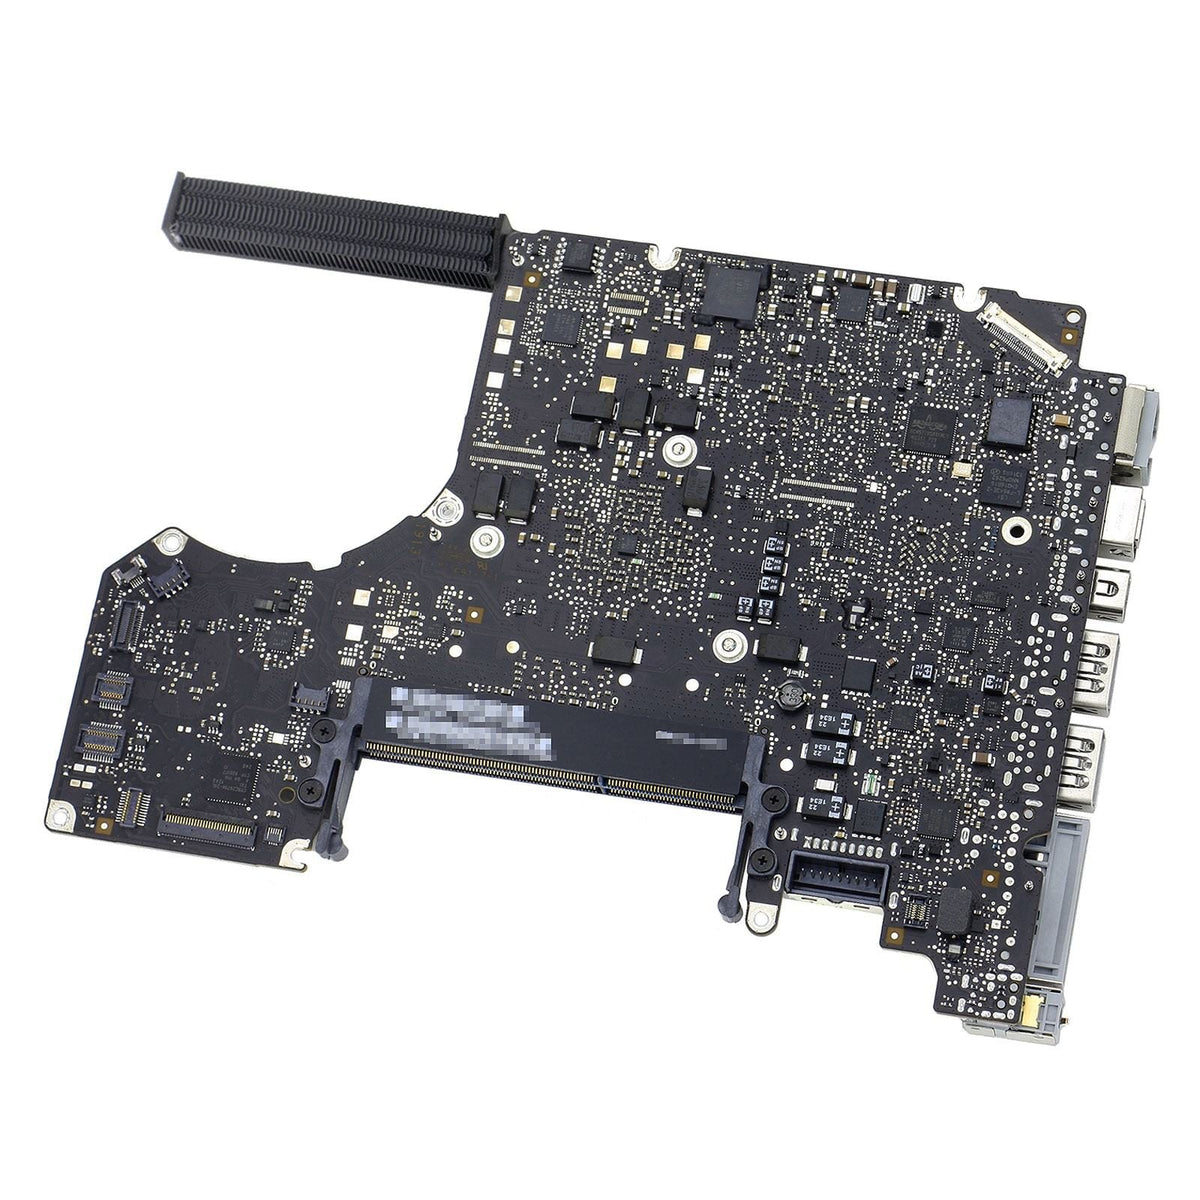 MOTHERBOARD FOR MACBOOK PRO 13" A1278 (MID 2012)